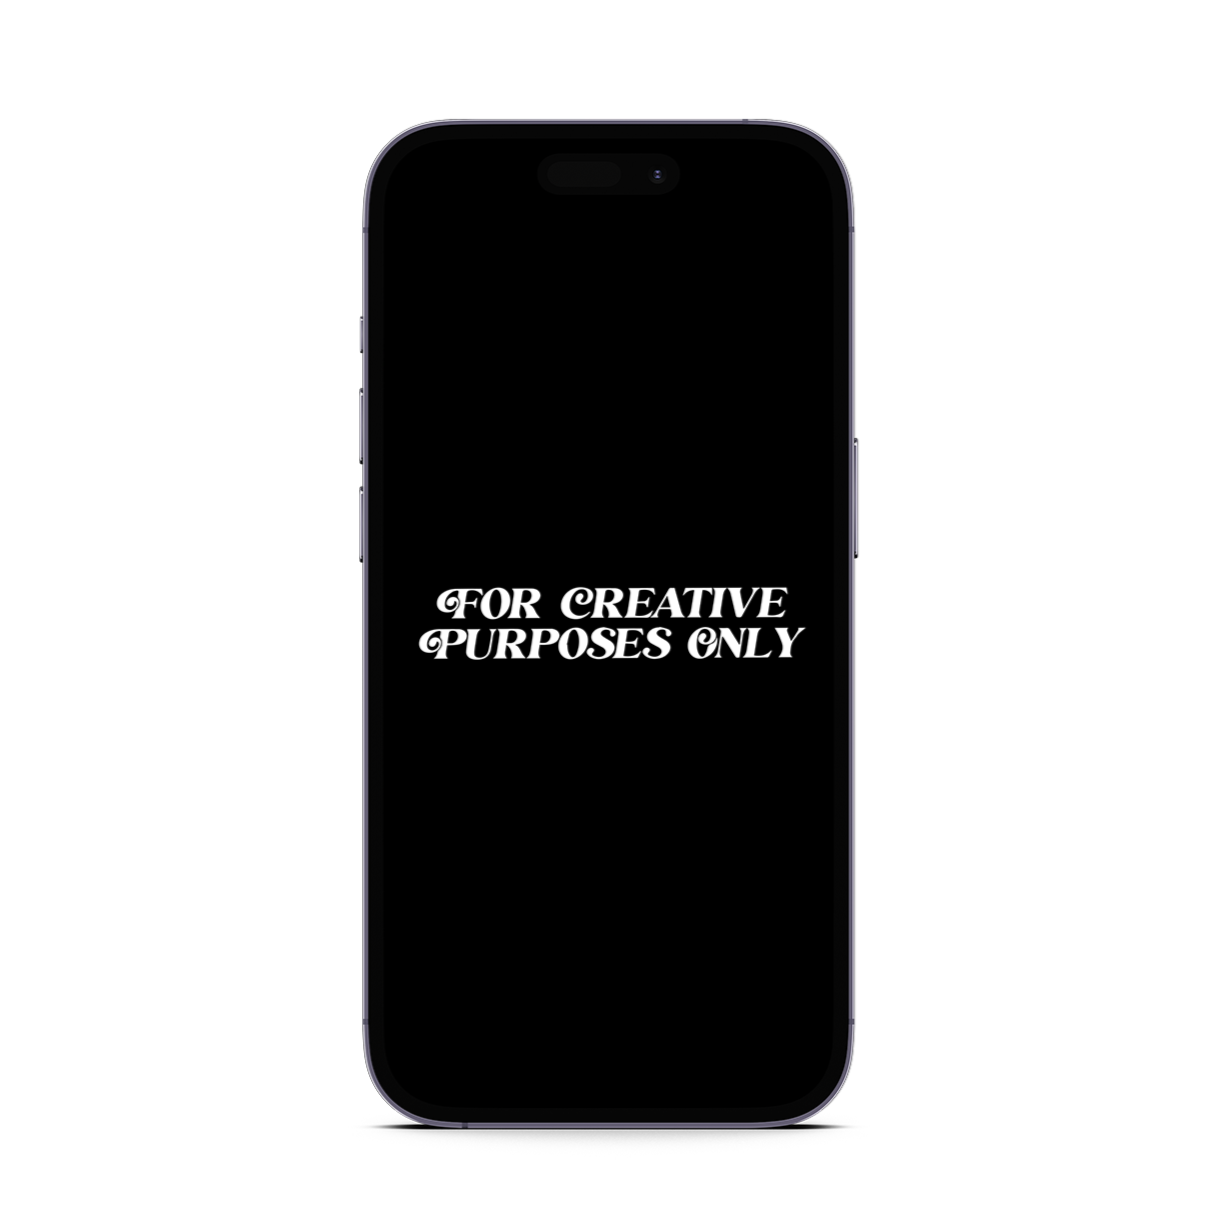 "FOR CREATIVE PURPOSES ONLY" Wallpaper